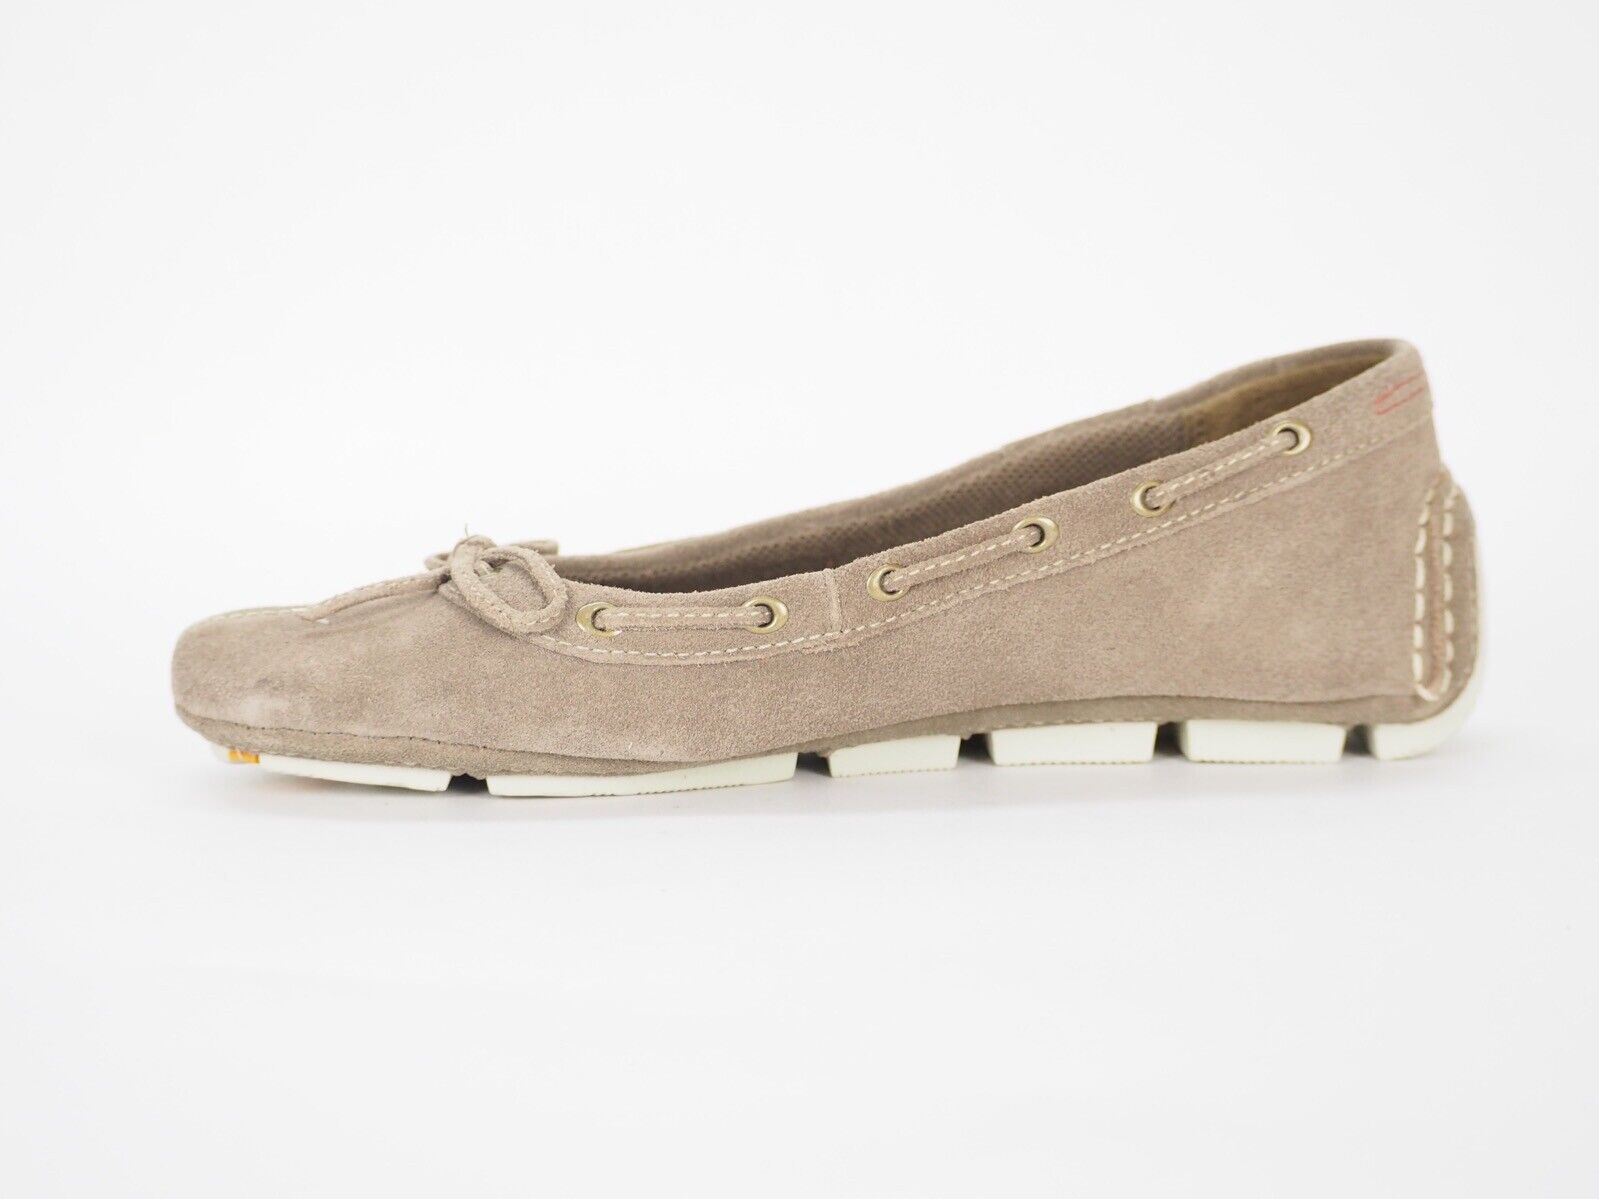 Womens Timberland Baldaci 83396 Taupe Suede Slip On Ballerina Light Ladies Shoes - London Top Style